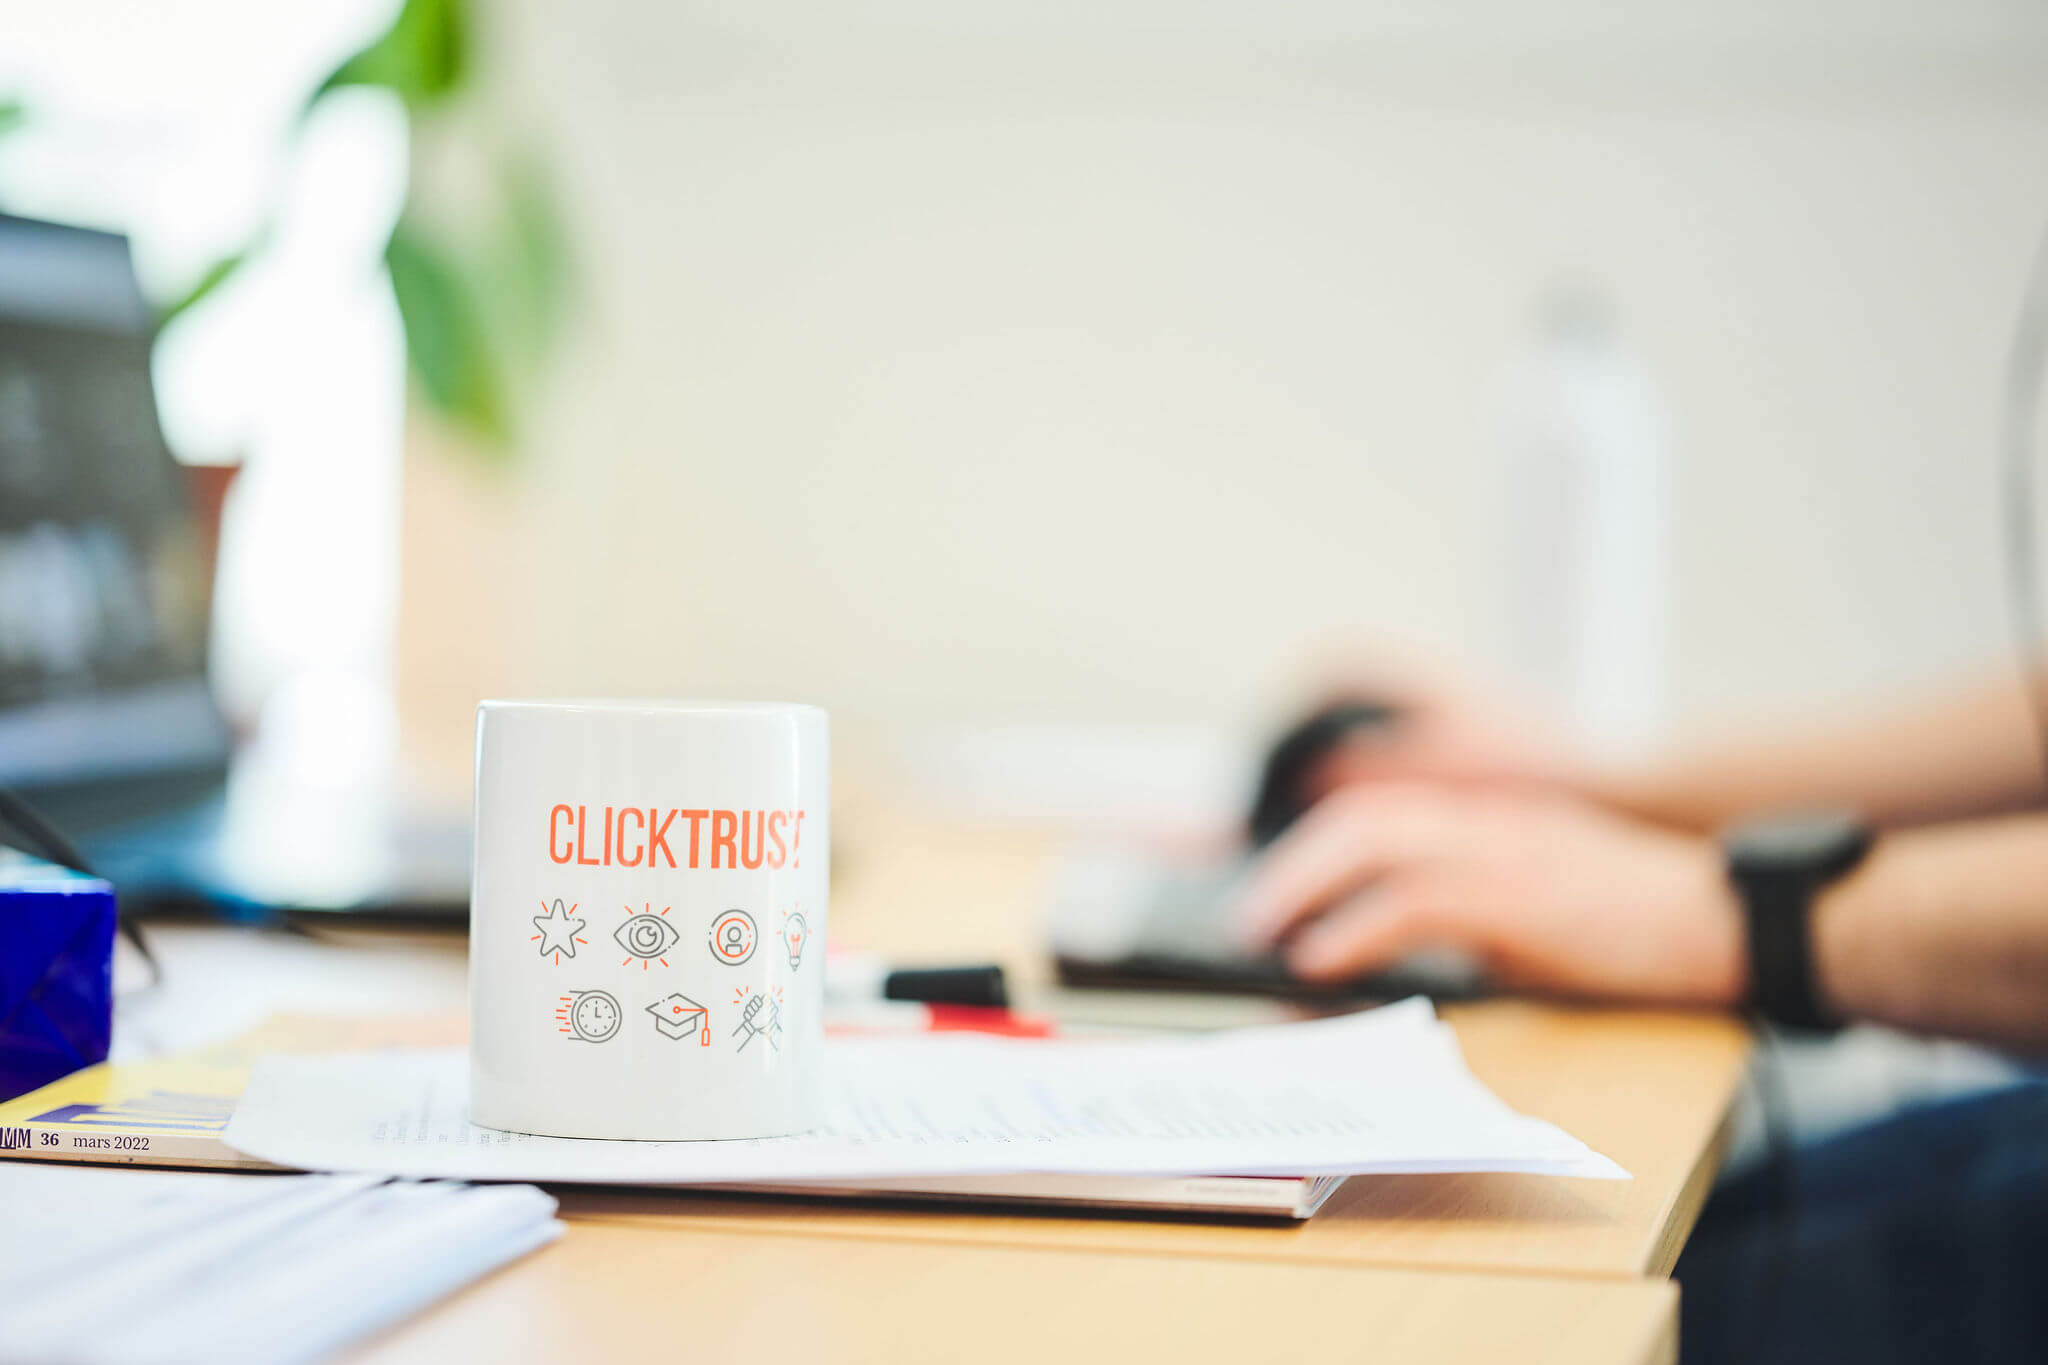 The CLICKTRUST monthly pick – April 2020